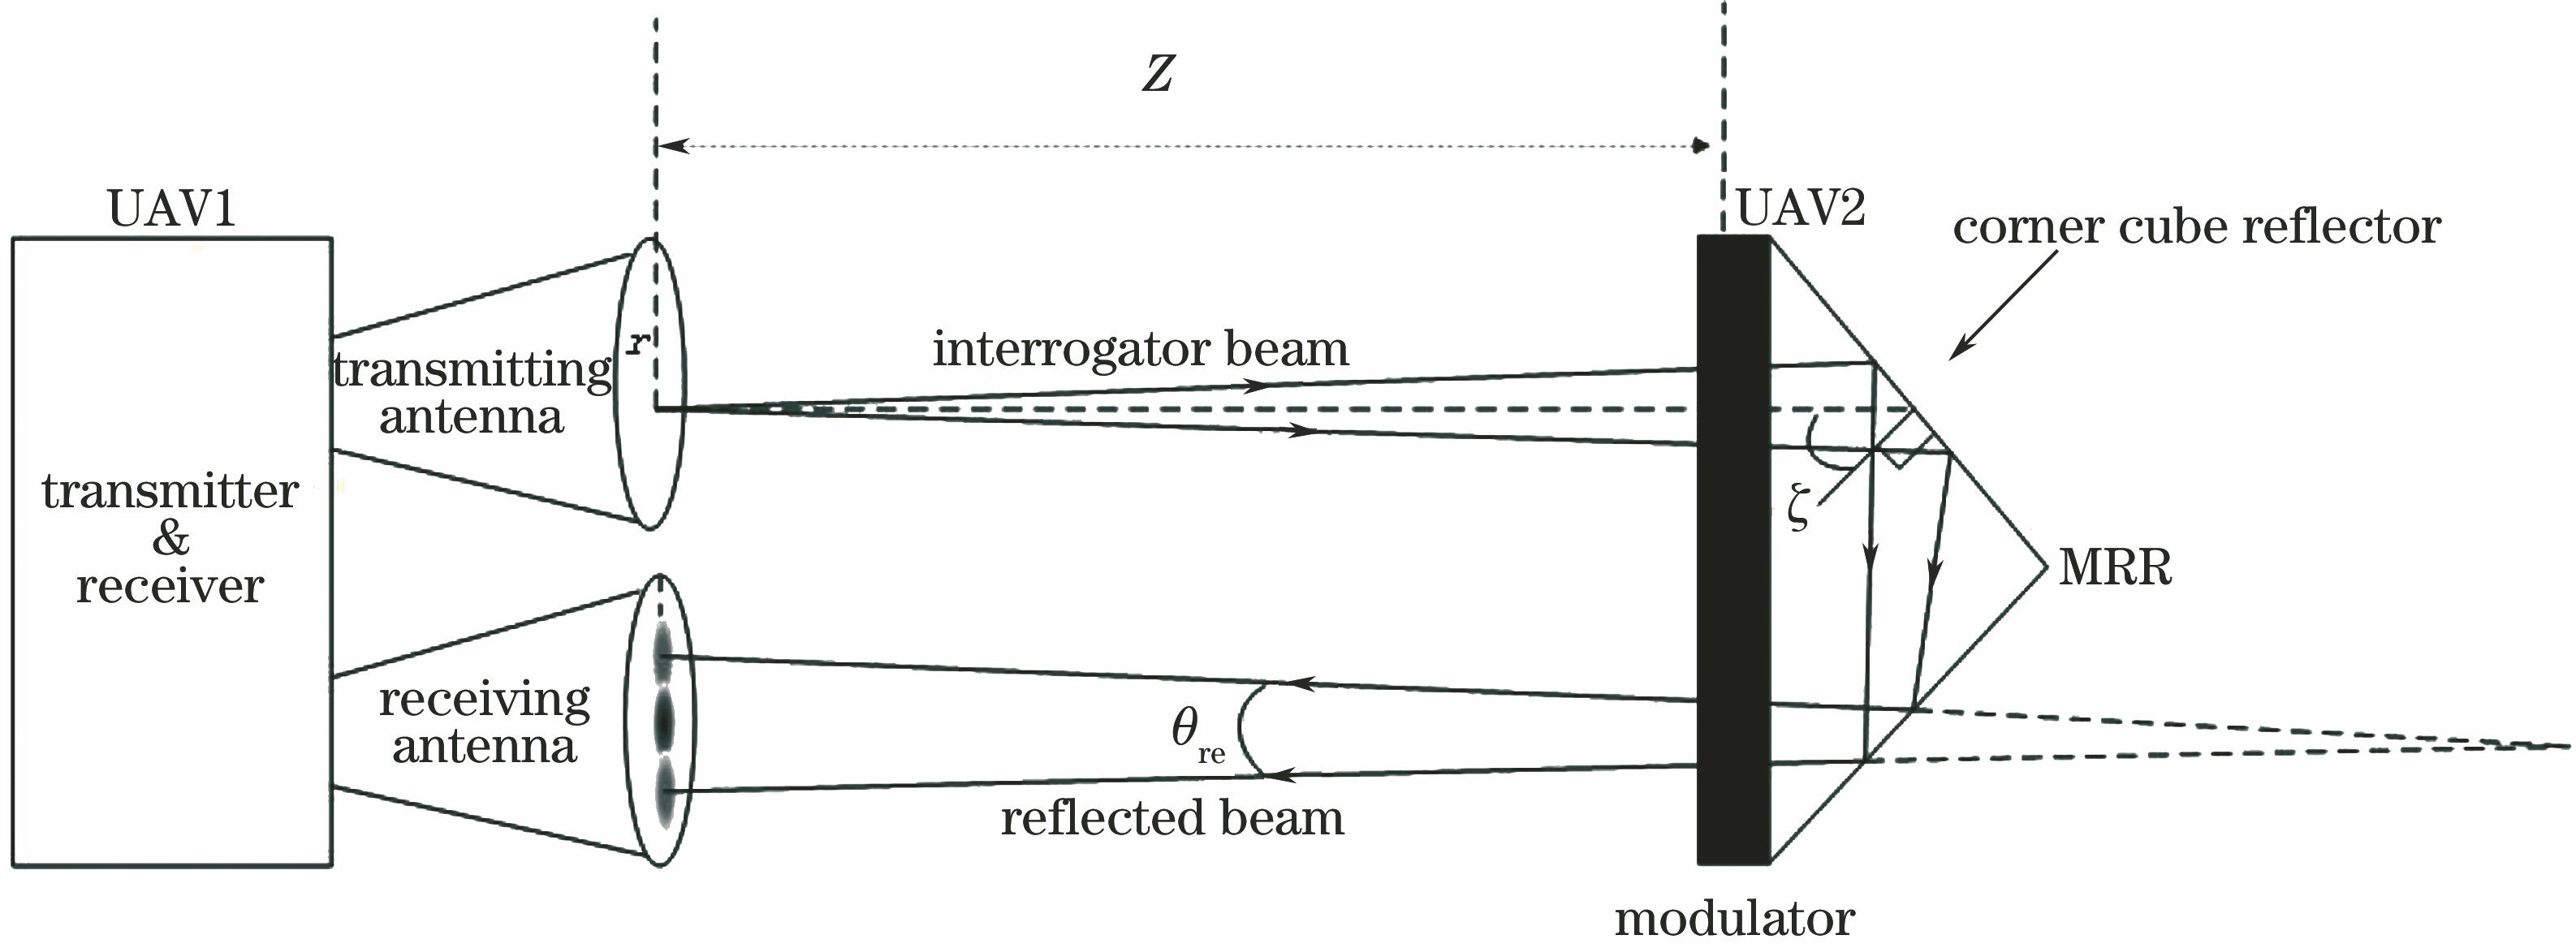 Schematic of divergence angle of reflected beam of CCR